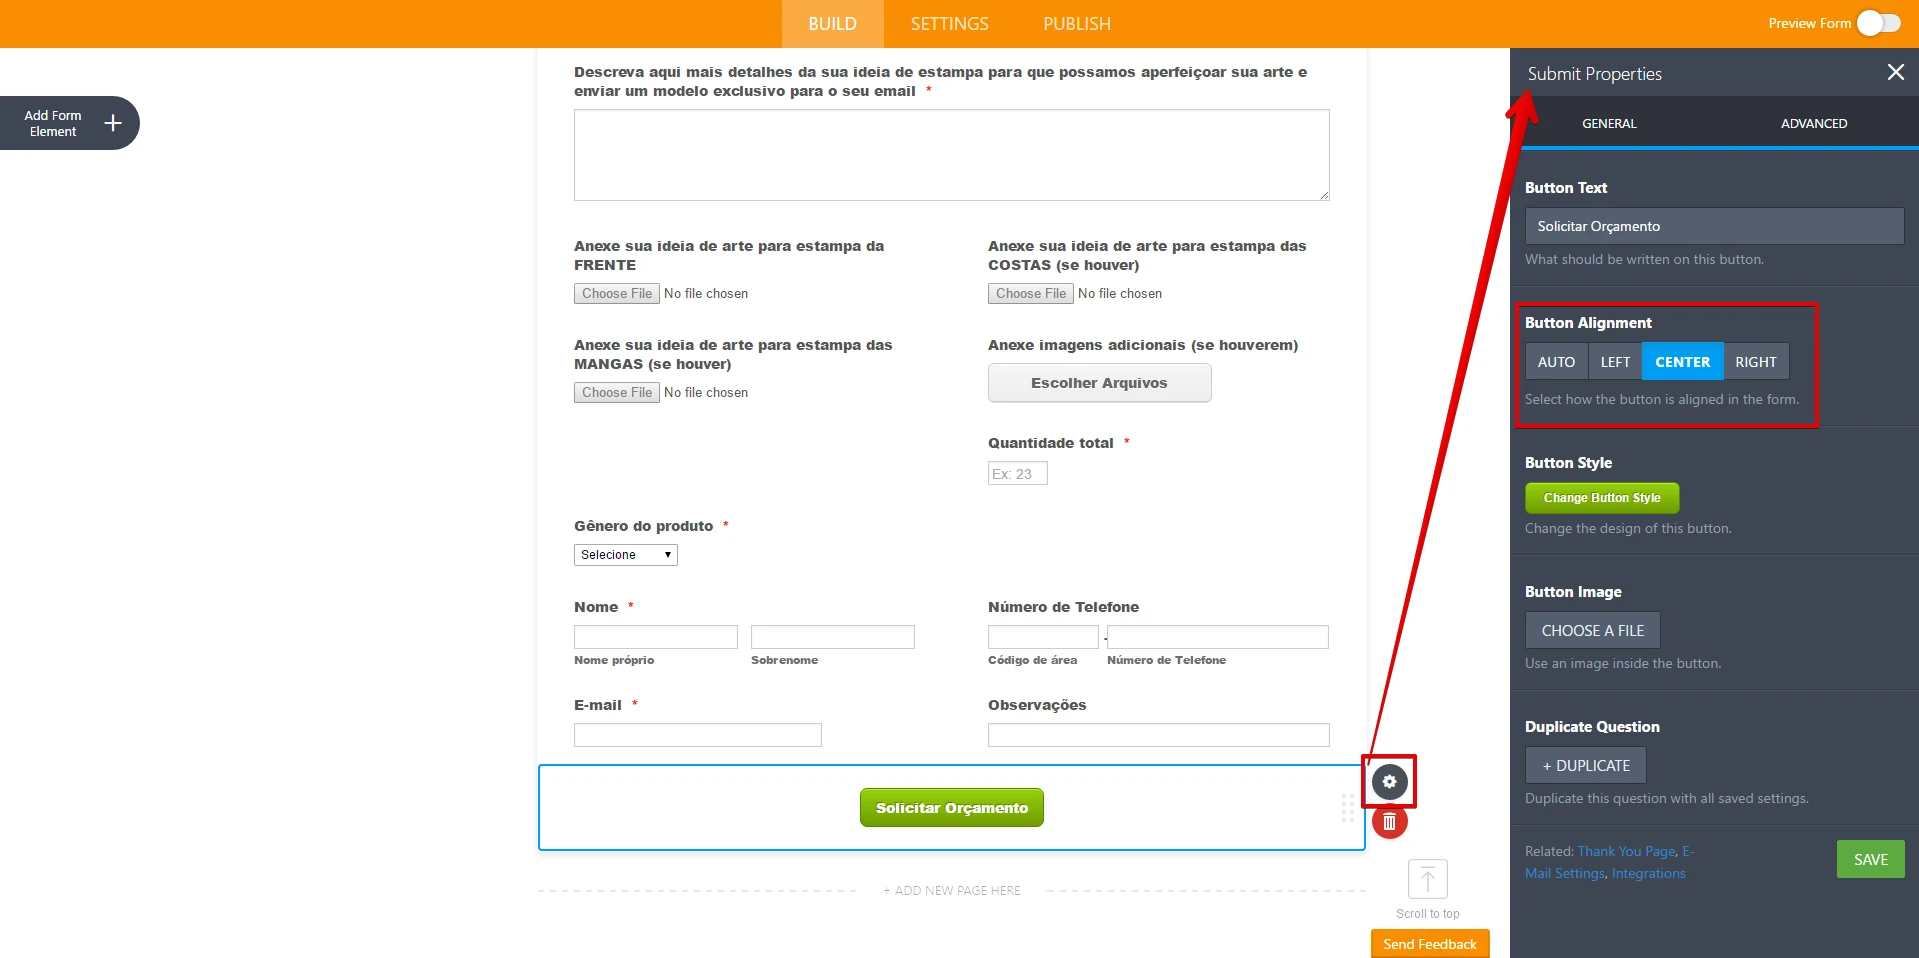 How to center align the submit button of the form? Image 1 Screenshot 20